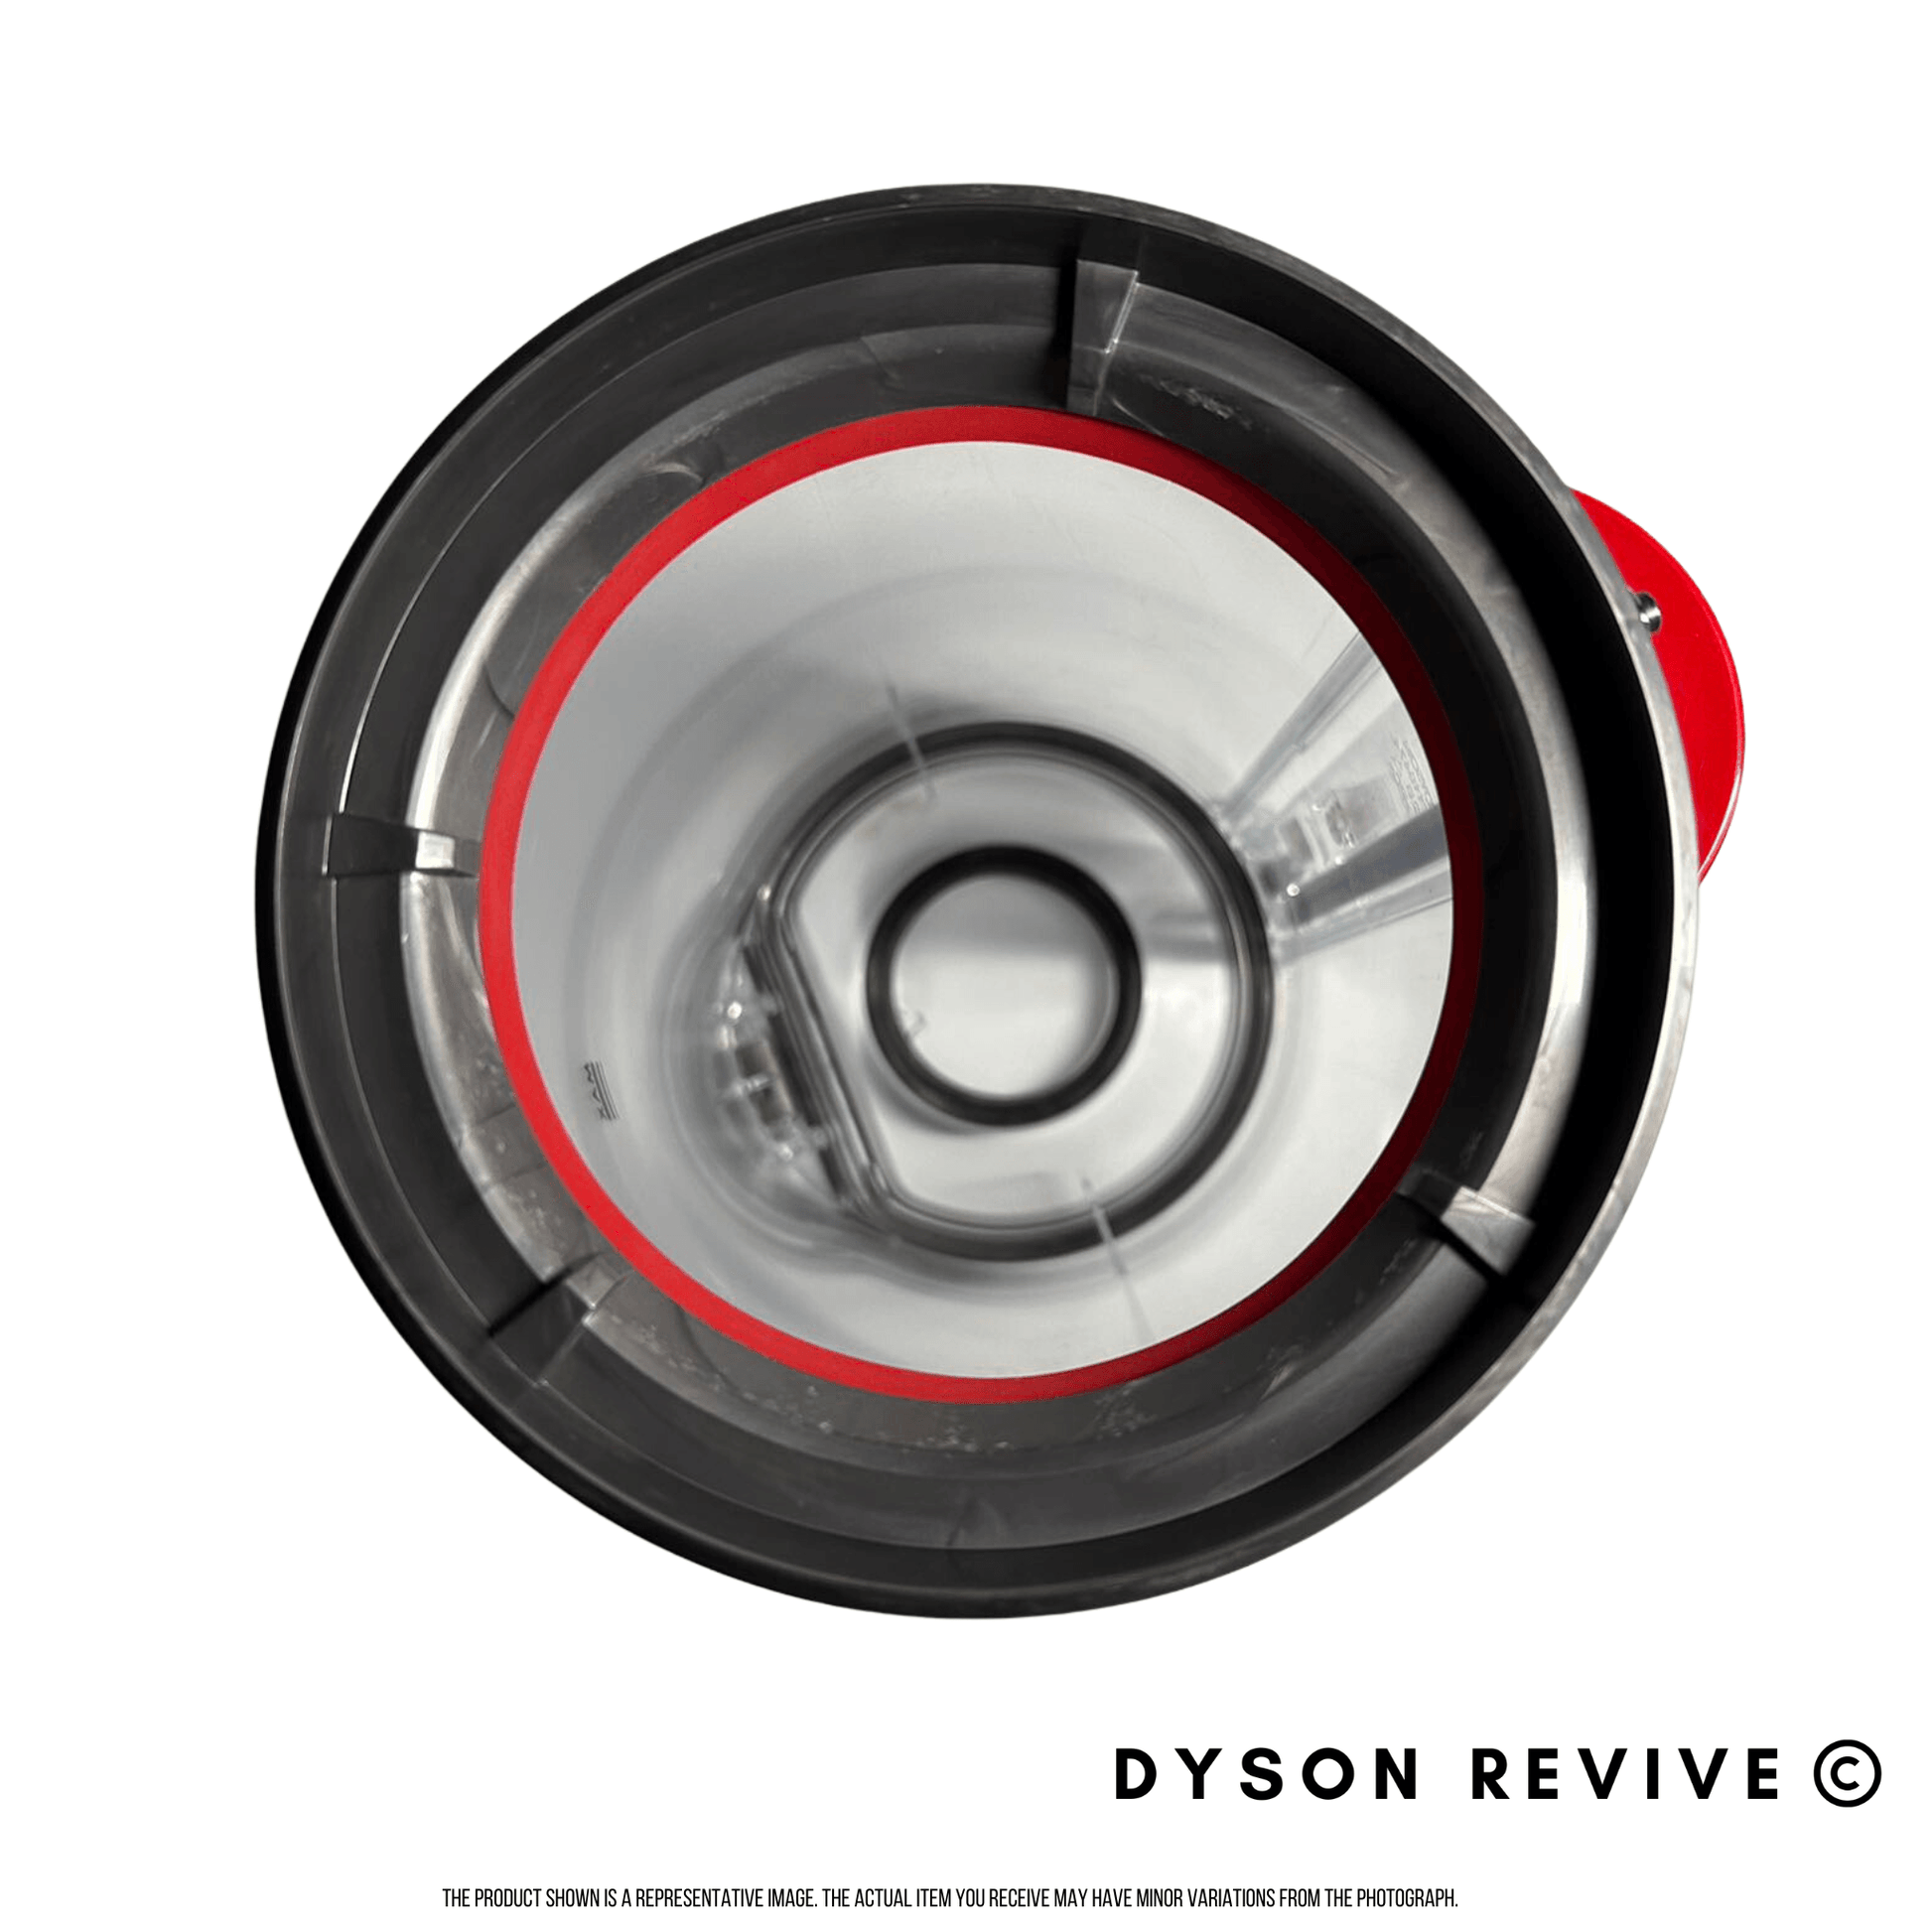 Genuine Dyson Refurbished Dustbin Canister for Dyson V11 Outsize - Dyson Revive